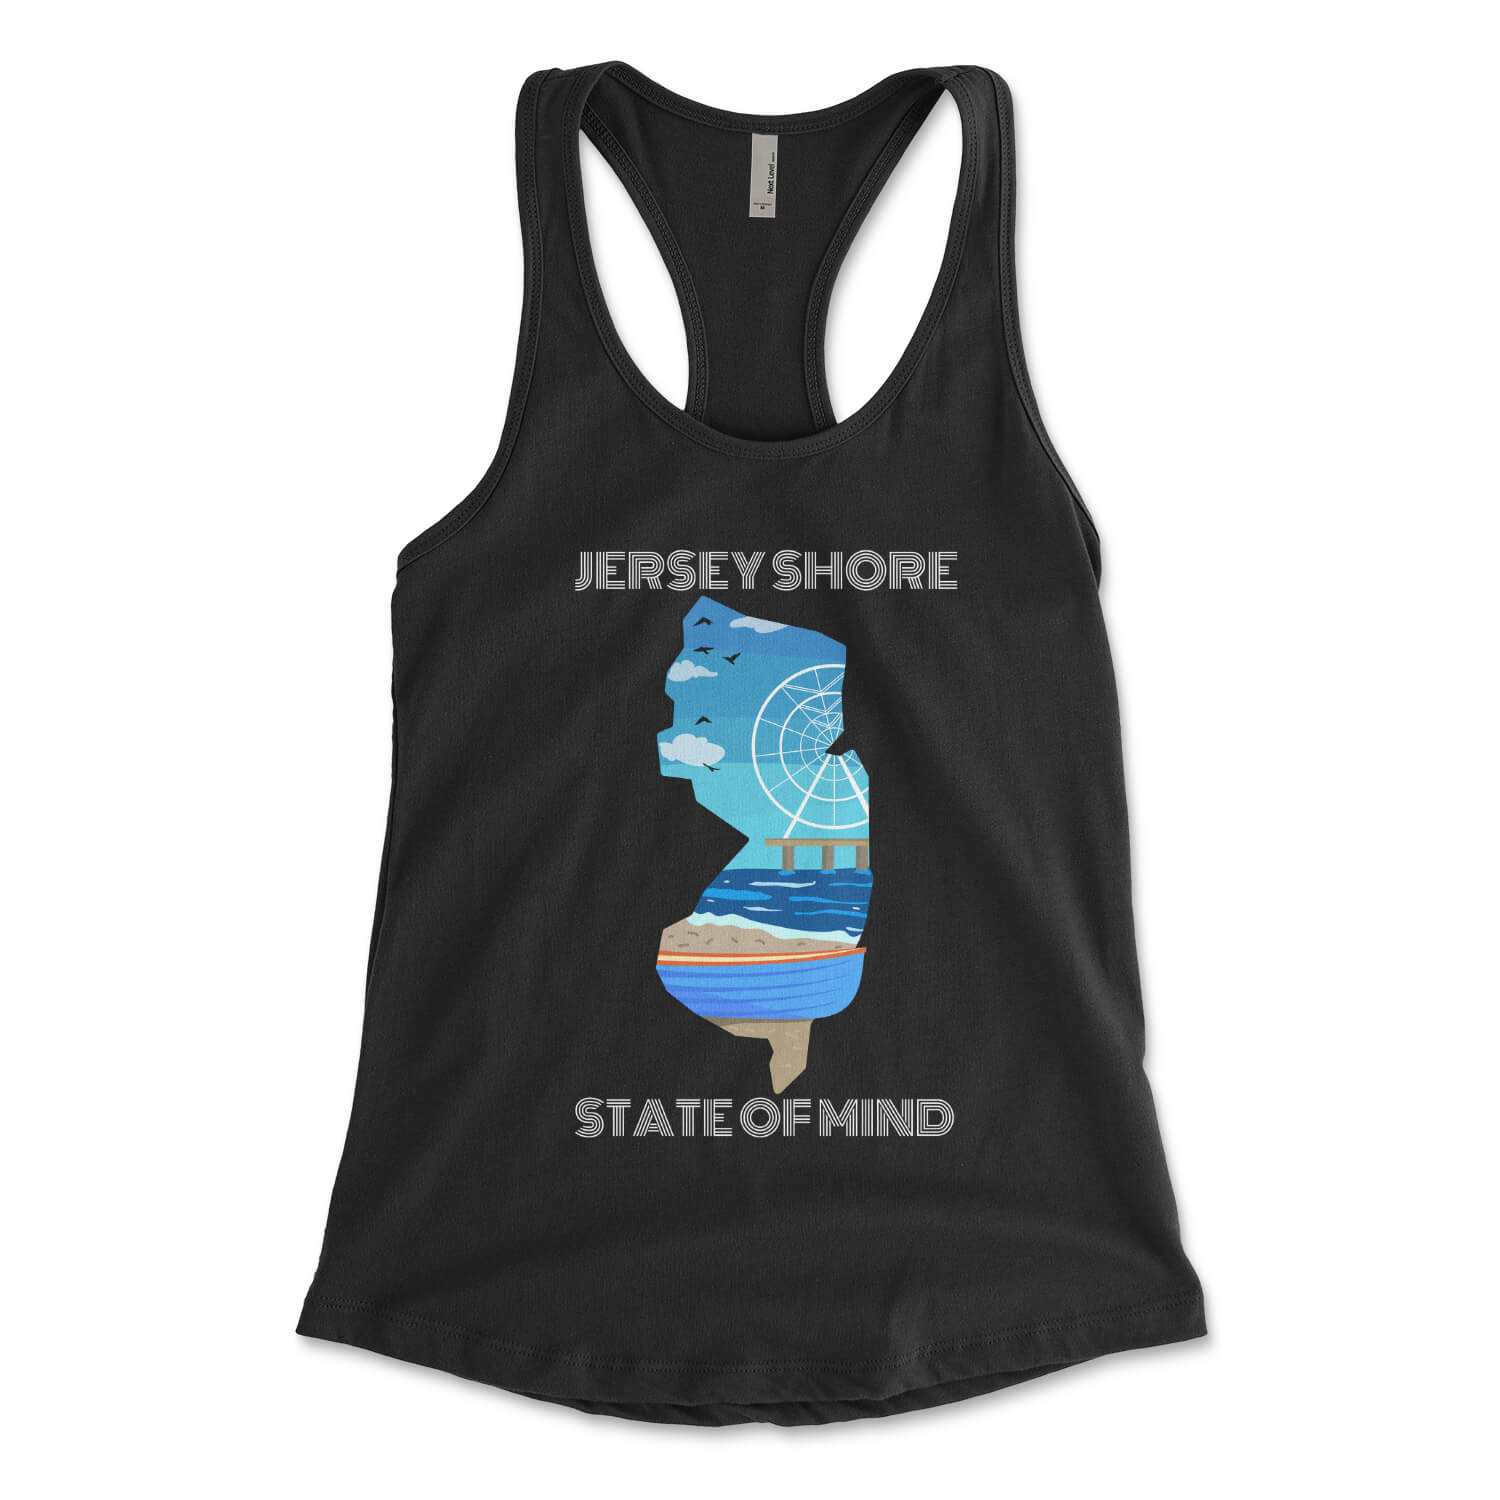 Jersey Shore state of mind black womens racerback tank top from Phillygoat